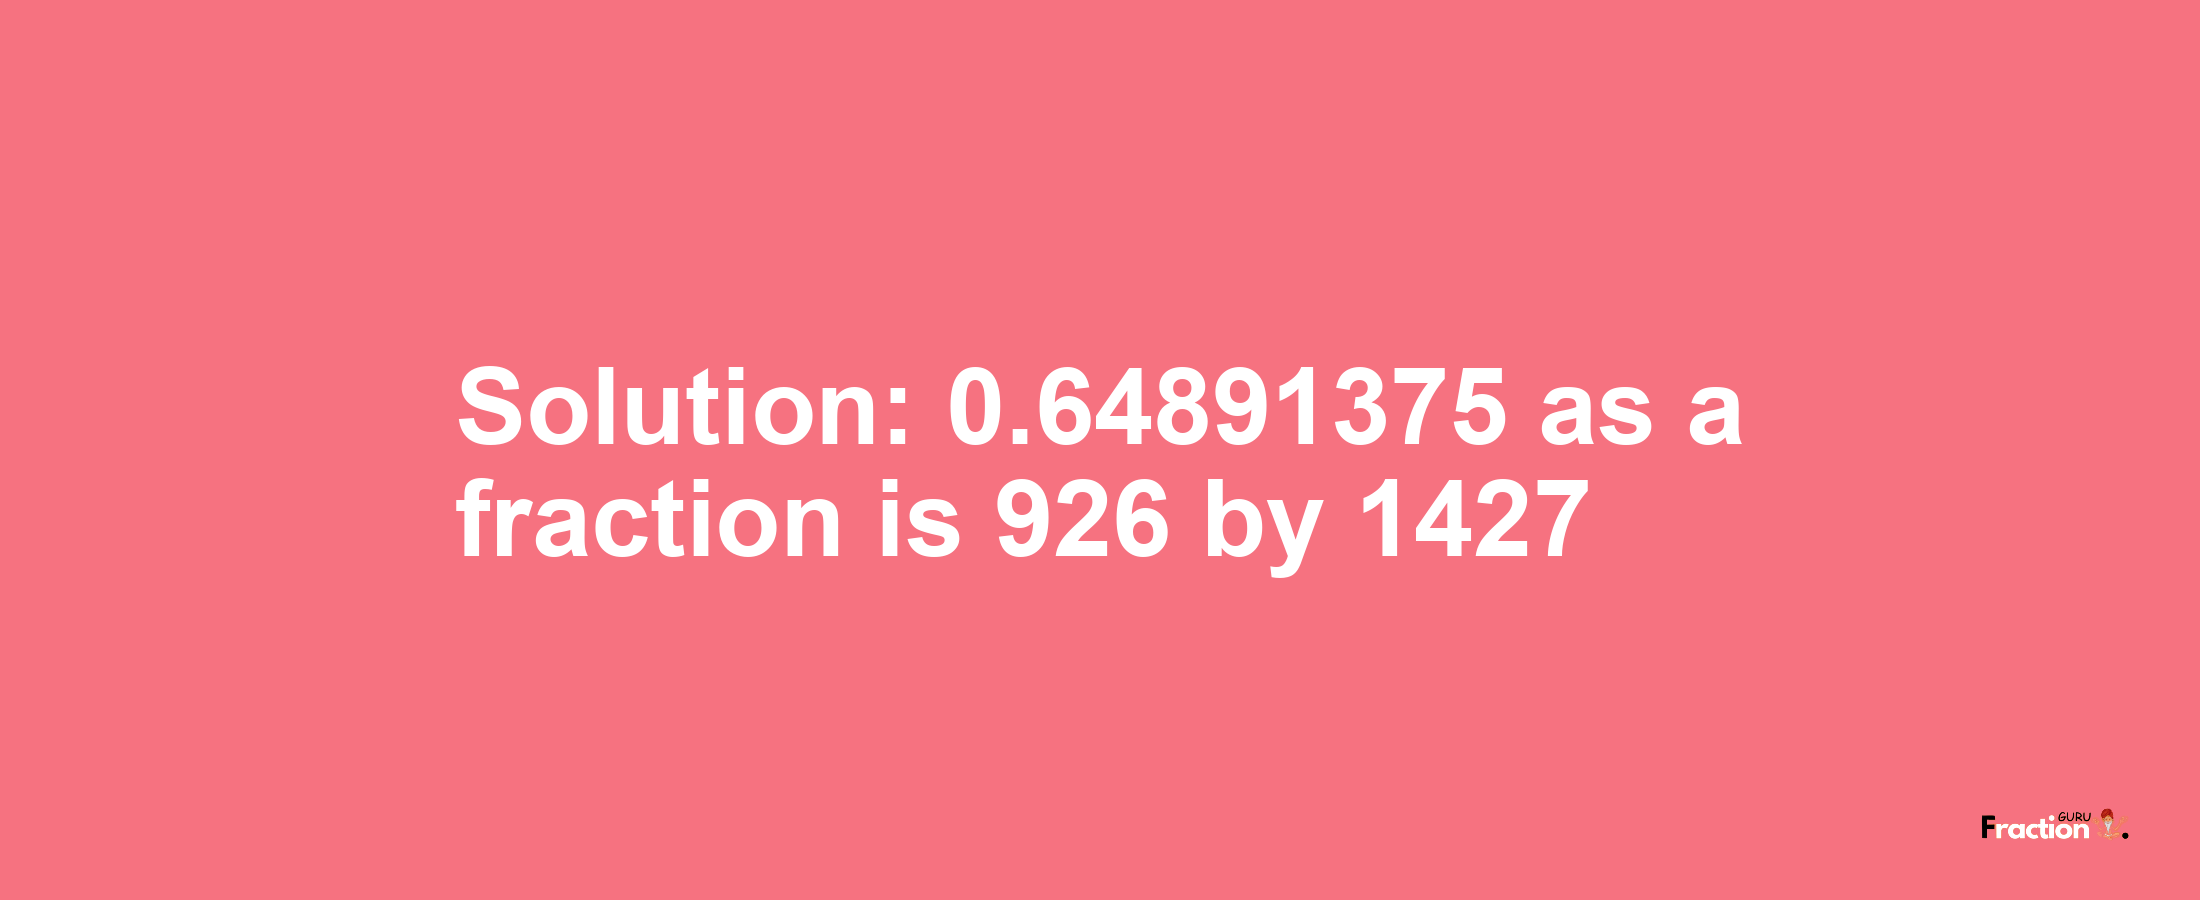 Solution:0.64891375 as a fraction is 926/1427